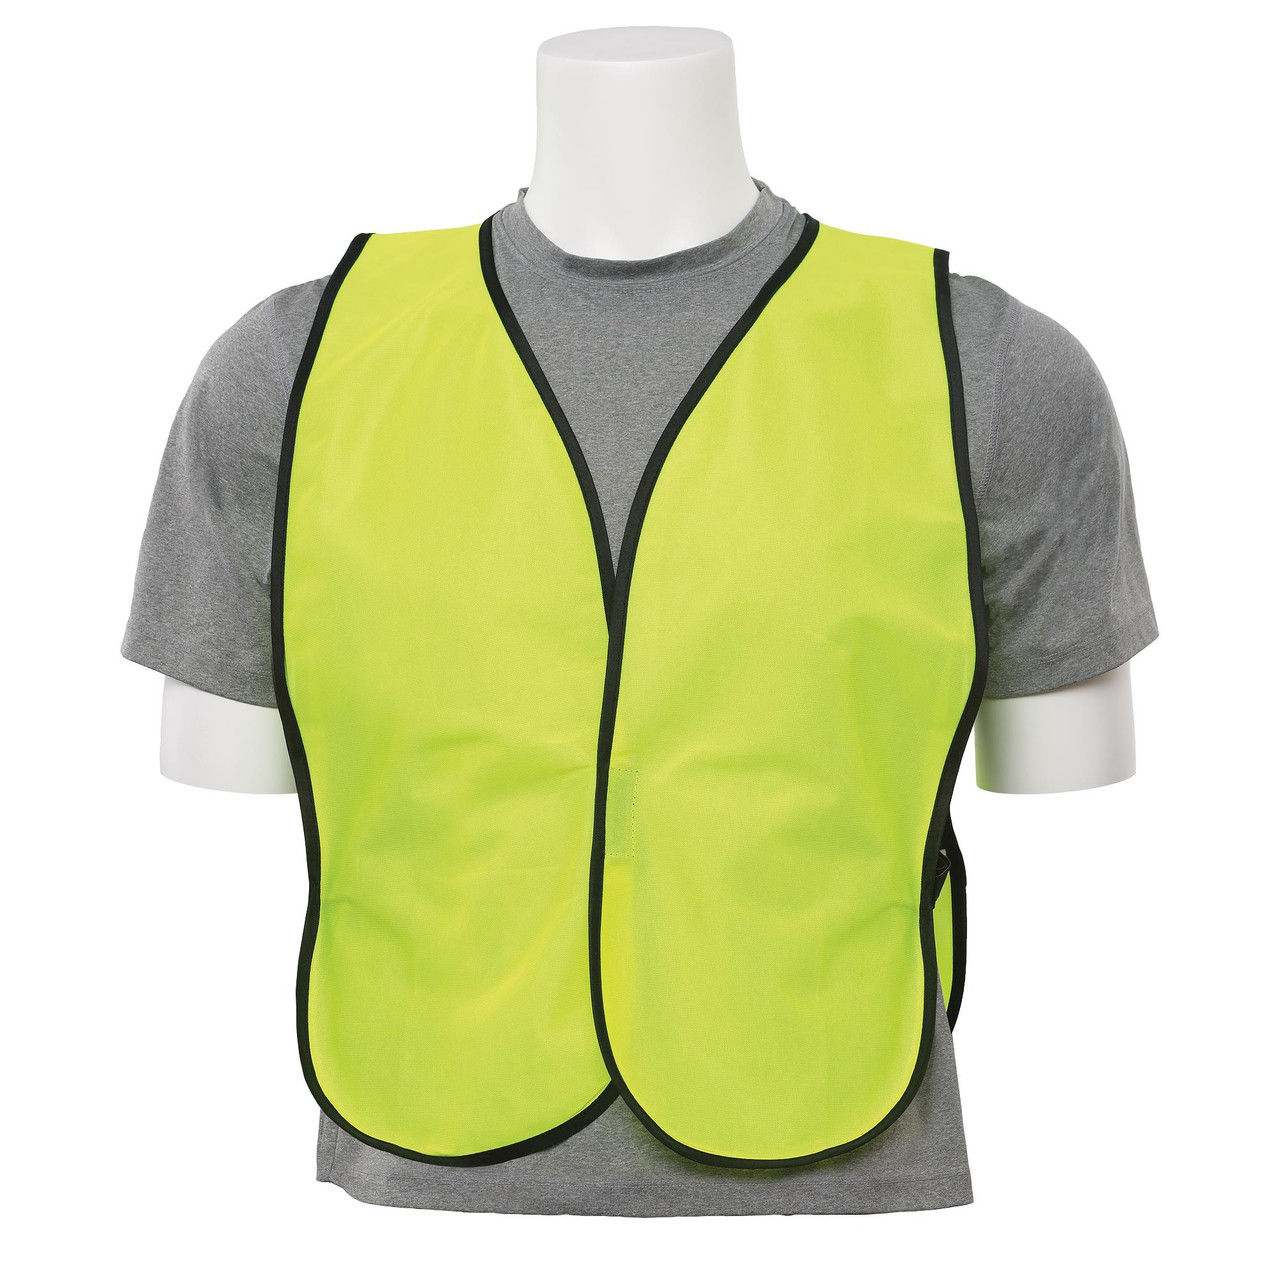 S19 Non ANSI Tight Weave Safety Vest Questions & Answers